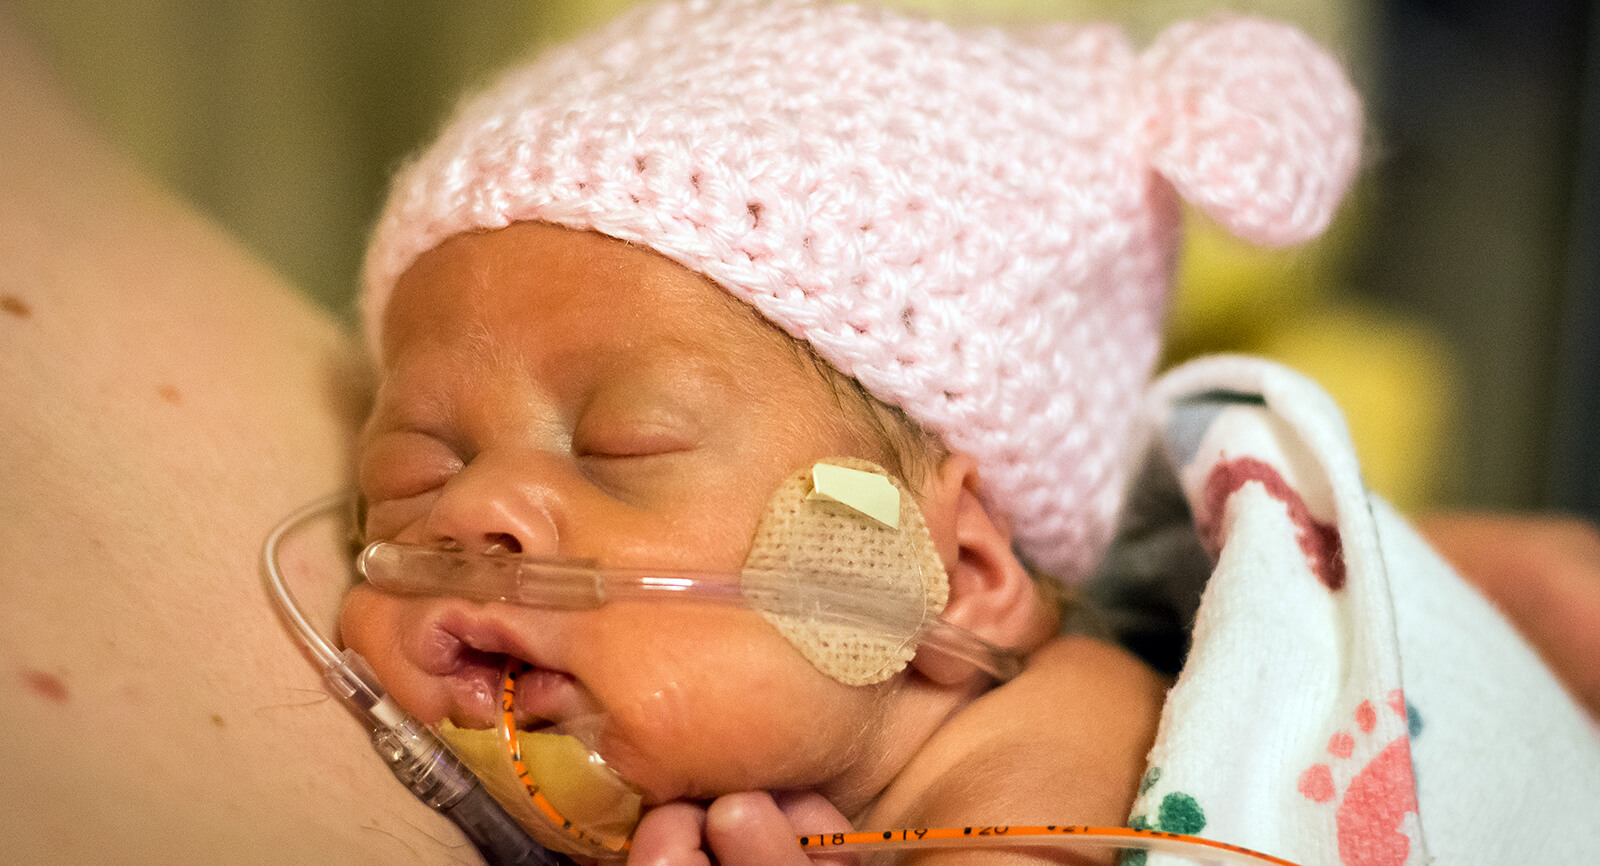 Published Approach to High Flow Nasal Cannula in Neonates | Vapotherm